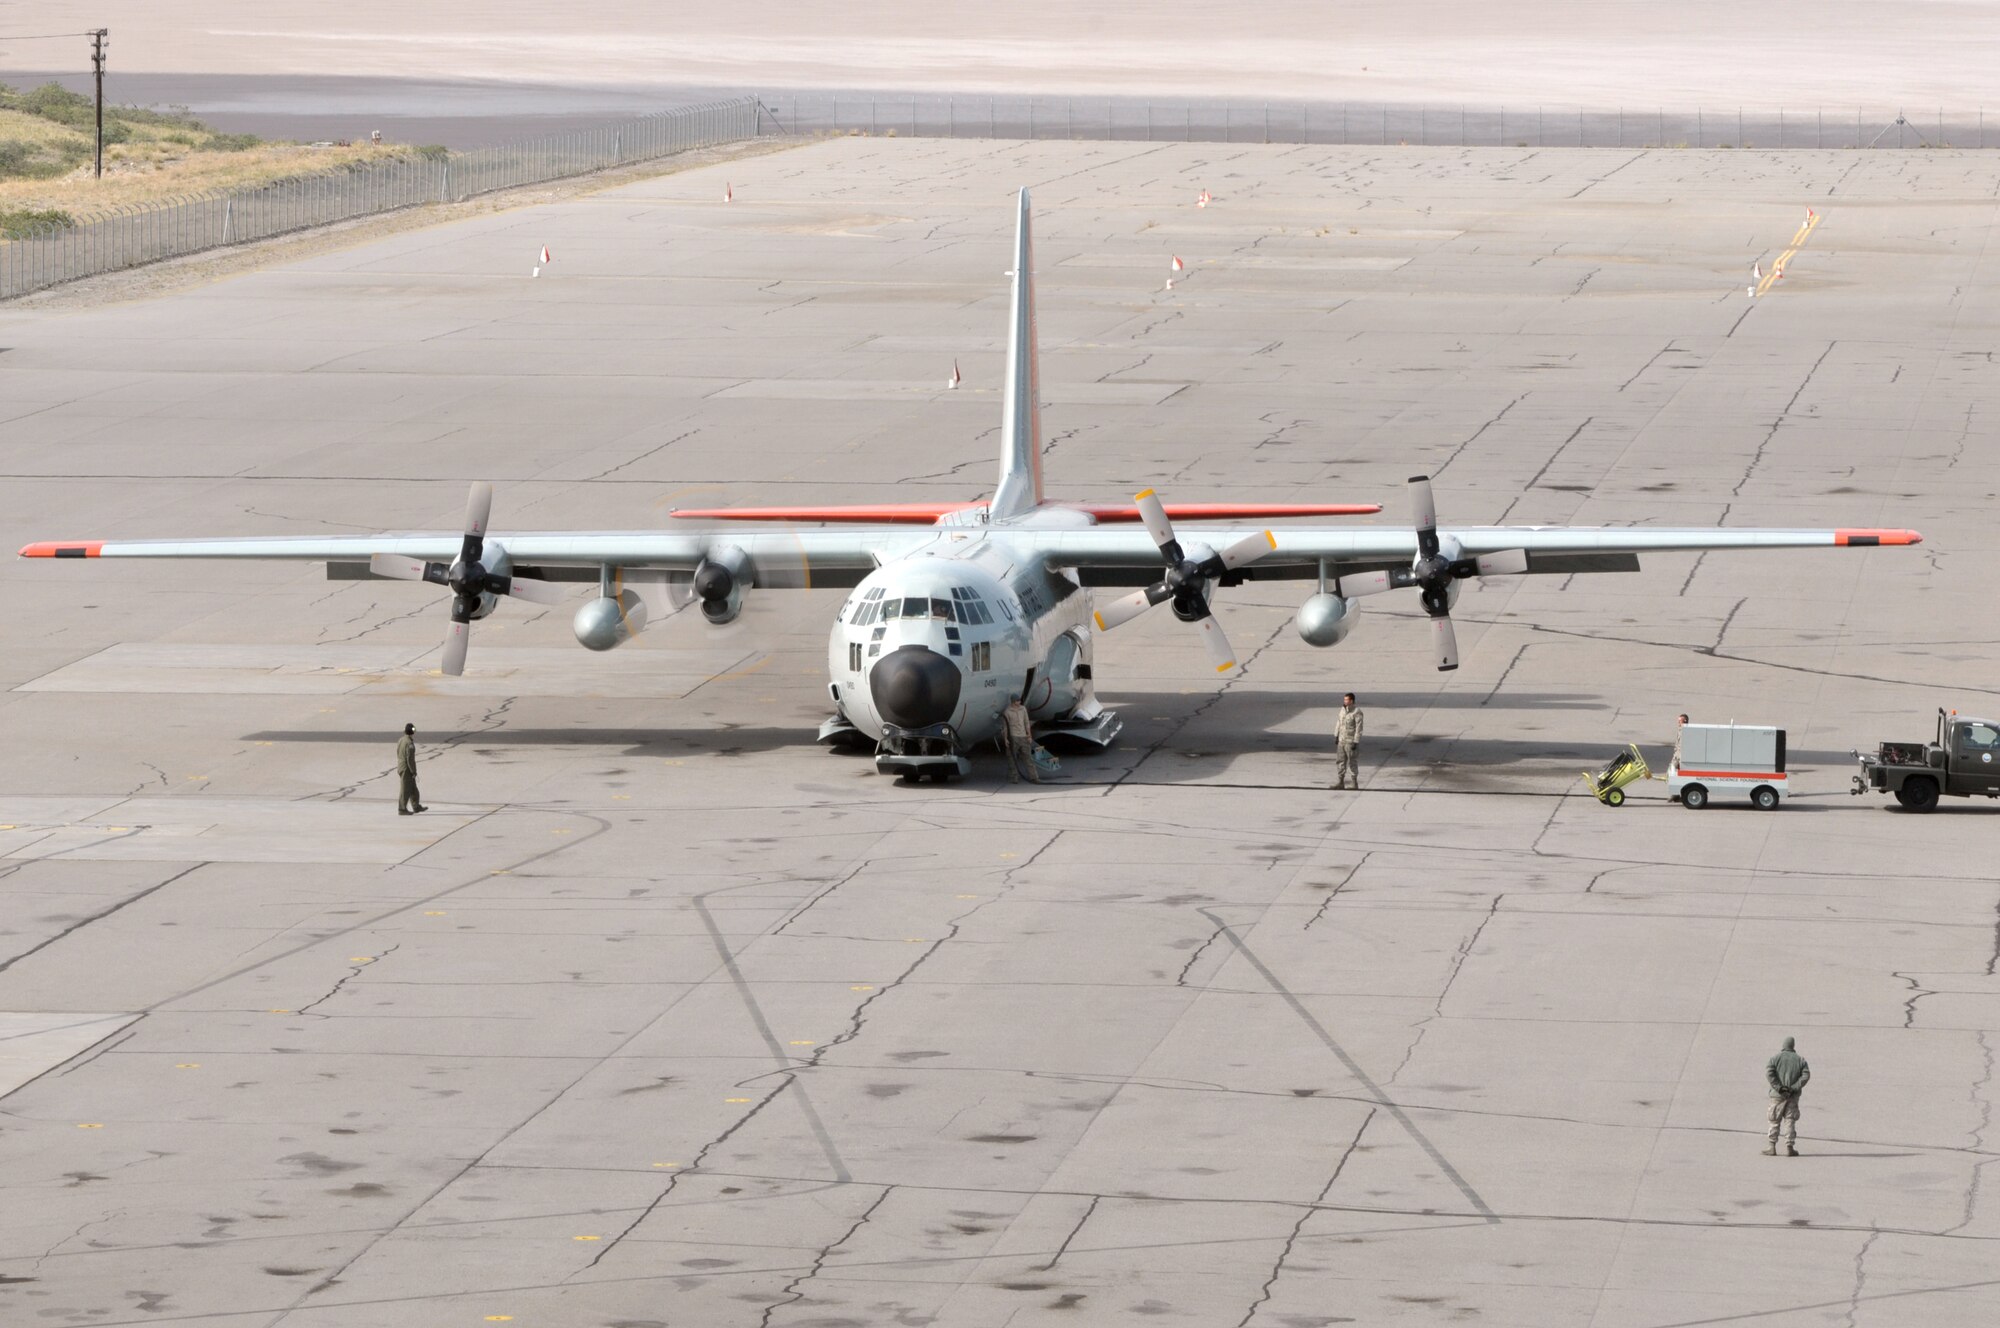 Airmen with the 109th Airlift Wing fuel an LC-130 "Skibird" from Stratton Air National Guard Base, Scotia, N.Y., on the flightline at Kangerlussuaq, Greenland, on June 29, 2014, before it takes off for Summit Camp. Two LC-130s and 70 Airmen from the Wing recently completed the fourth rotation of the 2014 Greenland season. The unit flies supply and refueling missions to various camps in support of the National Science Foundation and also trains for the Operation Deep Freeze mission in Antarctica. (U.S. Air National Guard photo by Staff Sgt. Benjamin German)